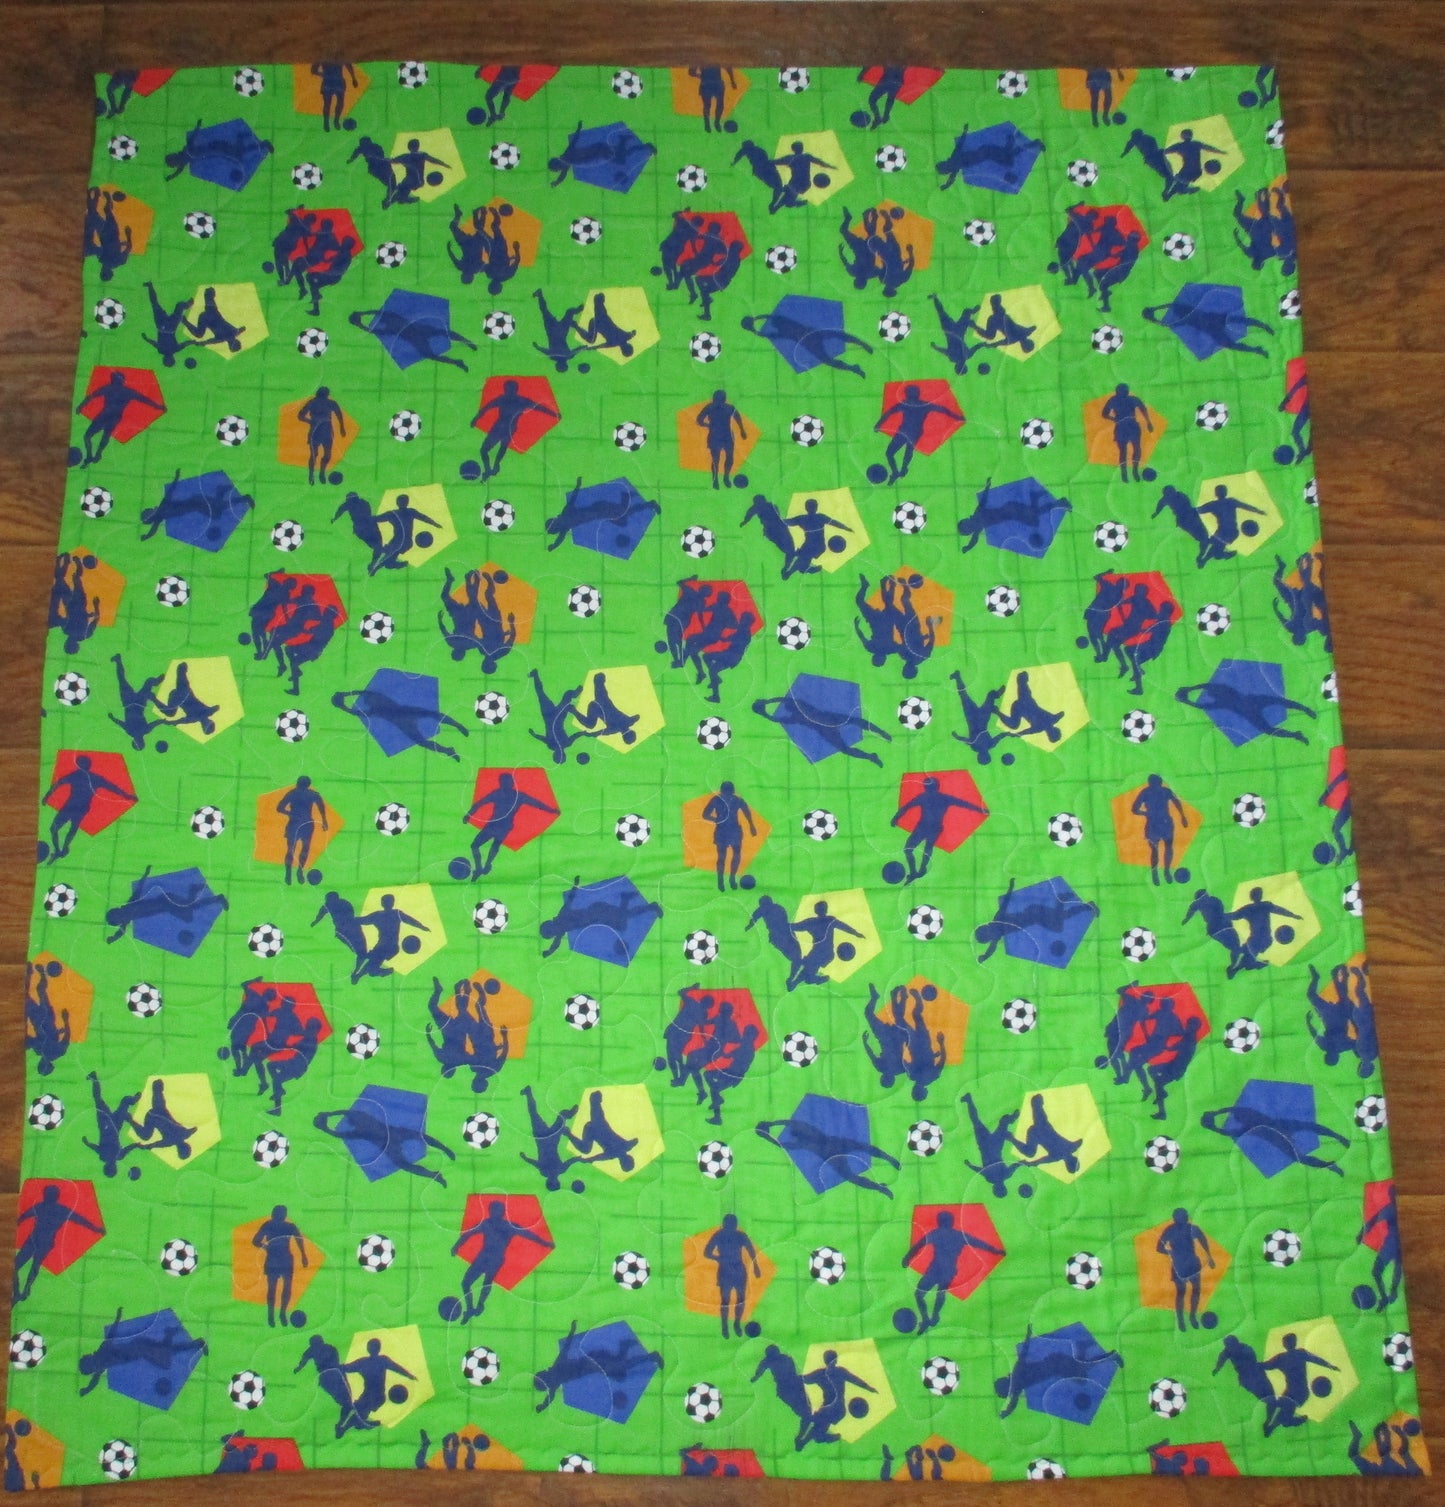 LET'S PLAY SOCCER Quilted Blanket Baby Nursery Child Toddler Bedding to Adult Lap Quilt